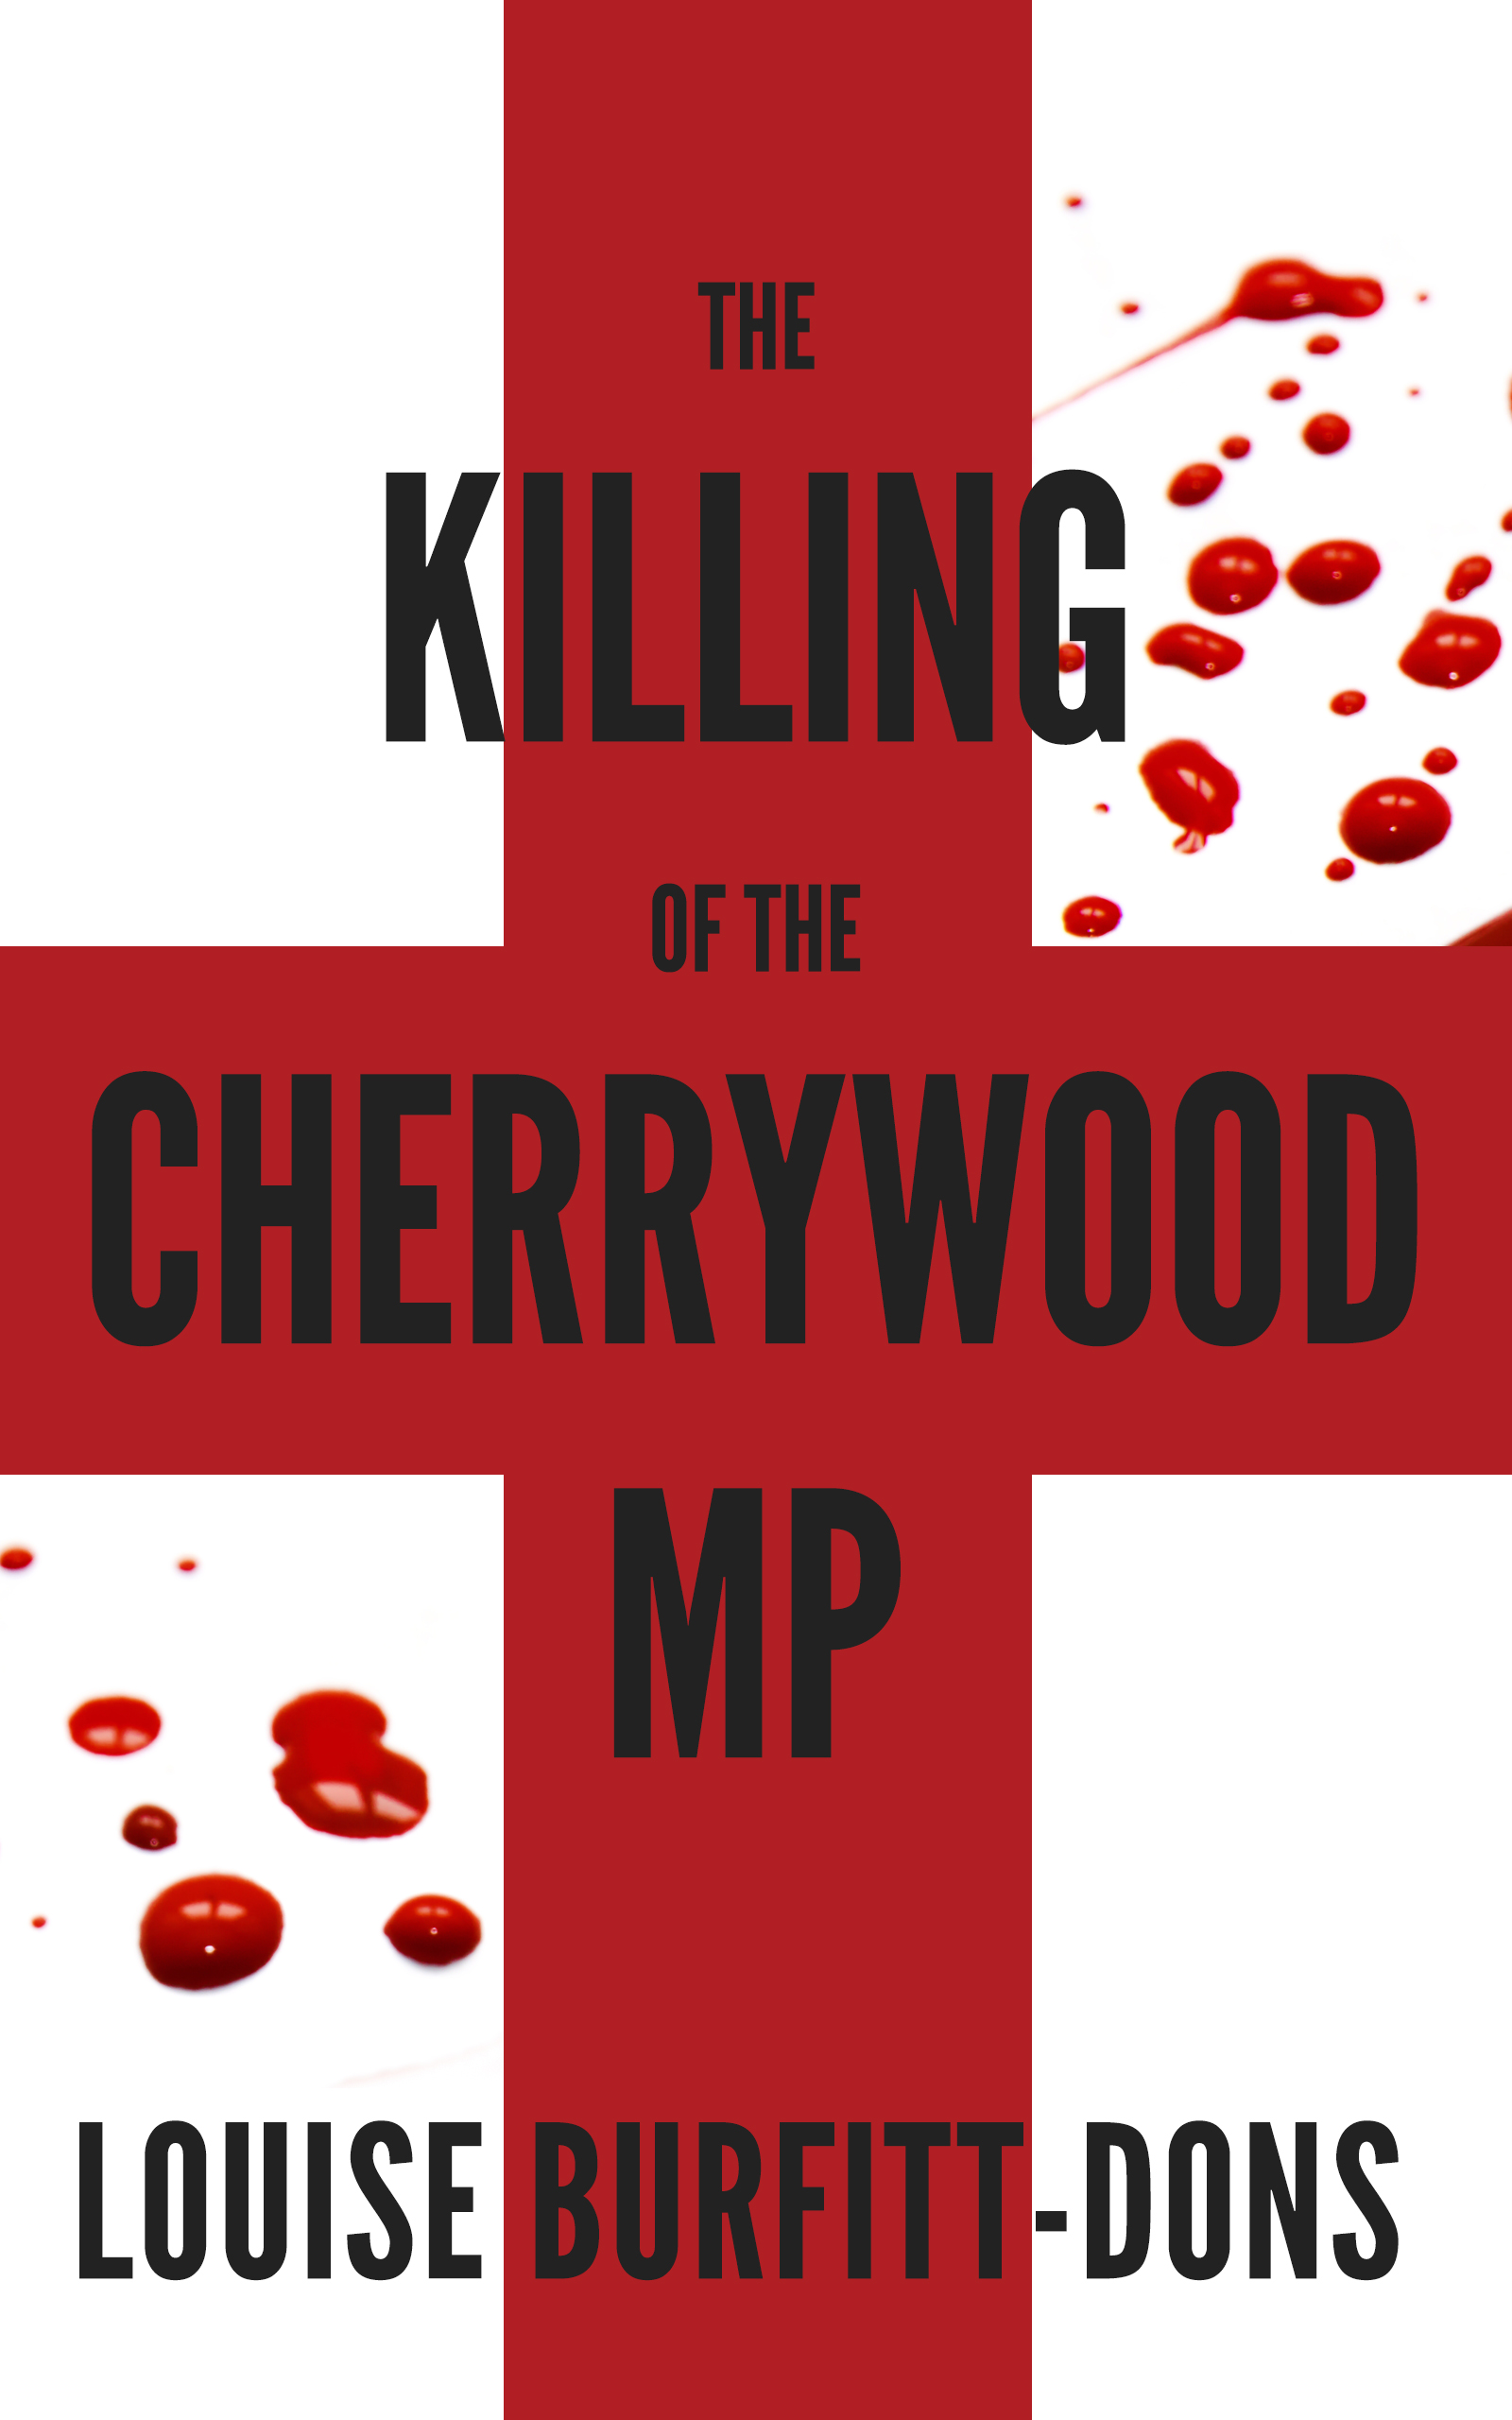 FREE: The Killing of the Cherrywood MP by Louise Burfitt-Dons